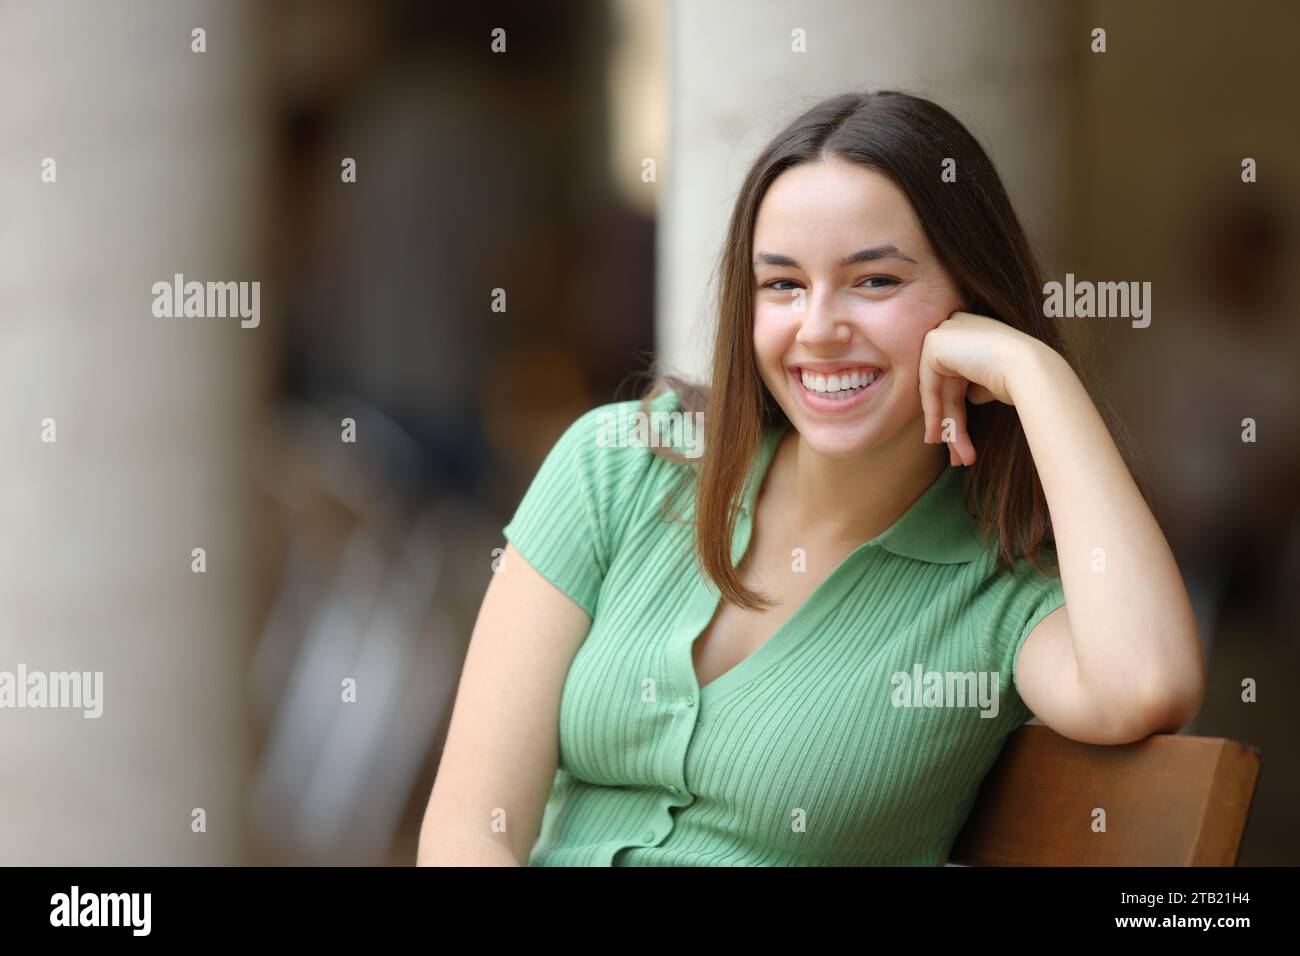 Happy woman laughing looking at camera sitting on a bench in the street Stock Photo